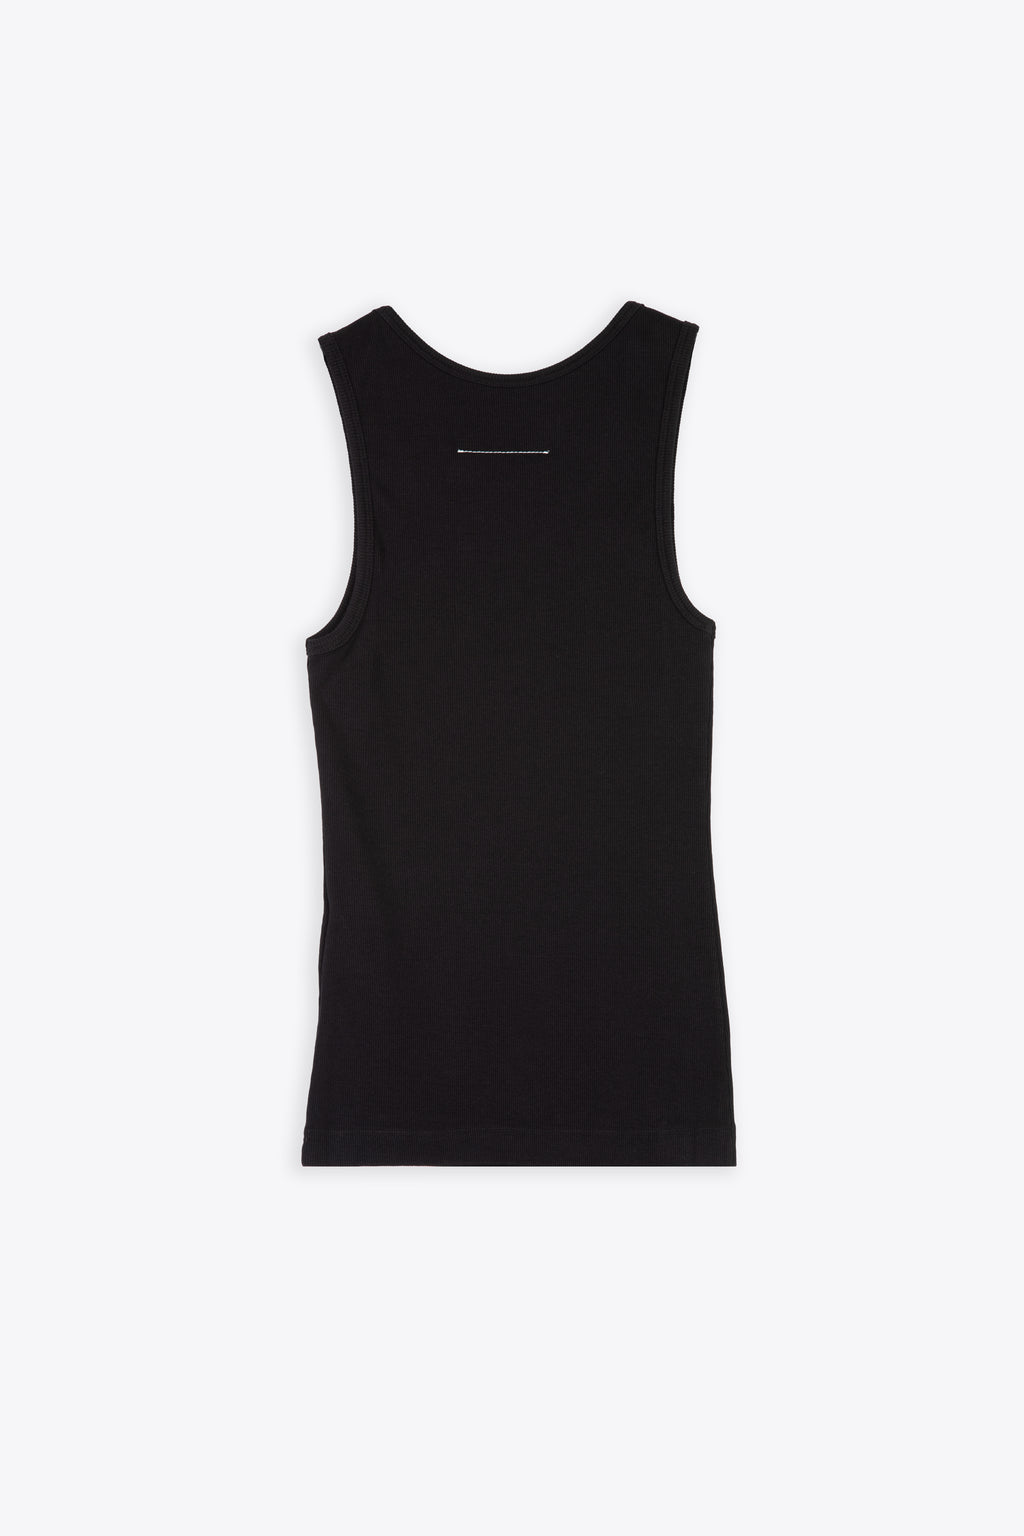 alt-image__Black-ribbed-cotton-tank-top-with-logo